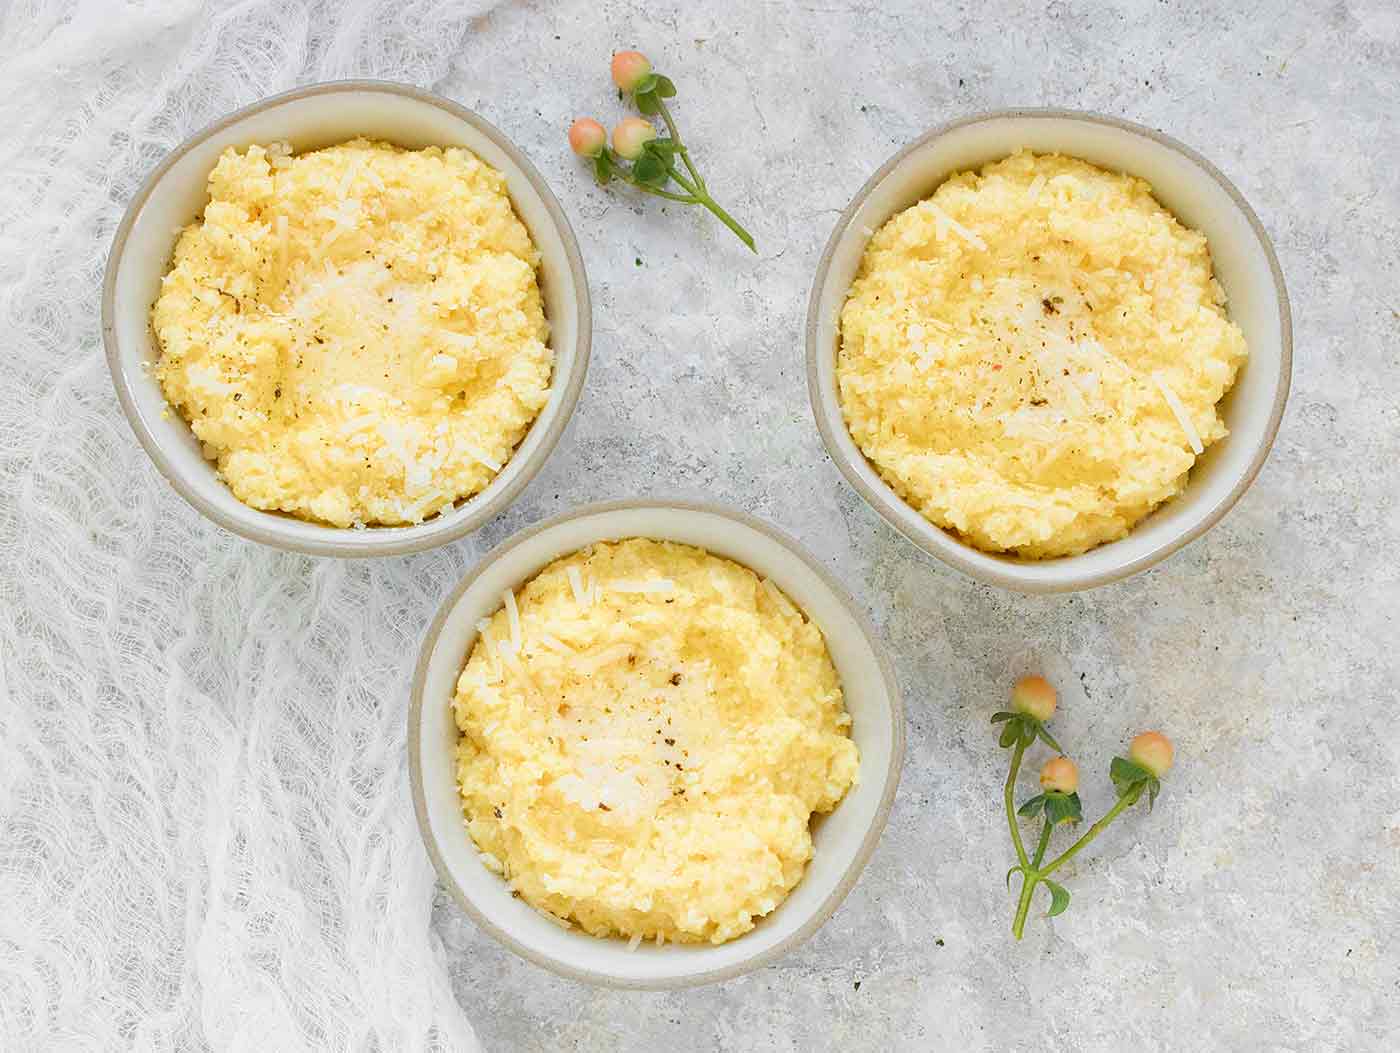 Three bowls of creamy, buttery cheese grits.